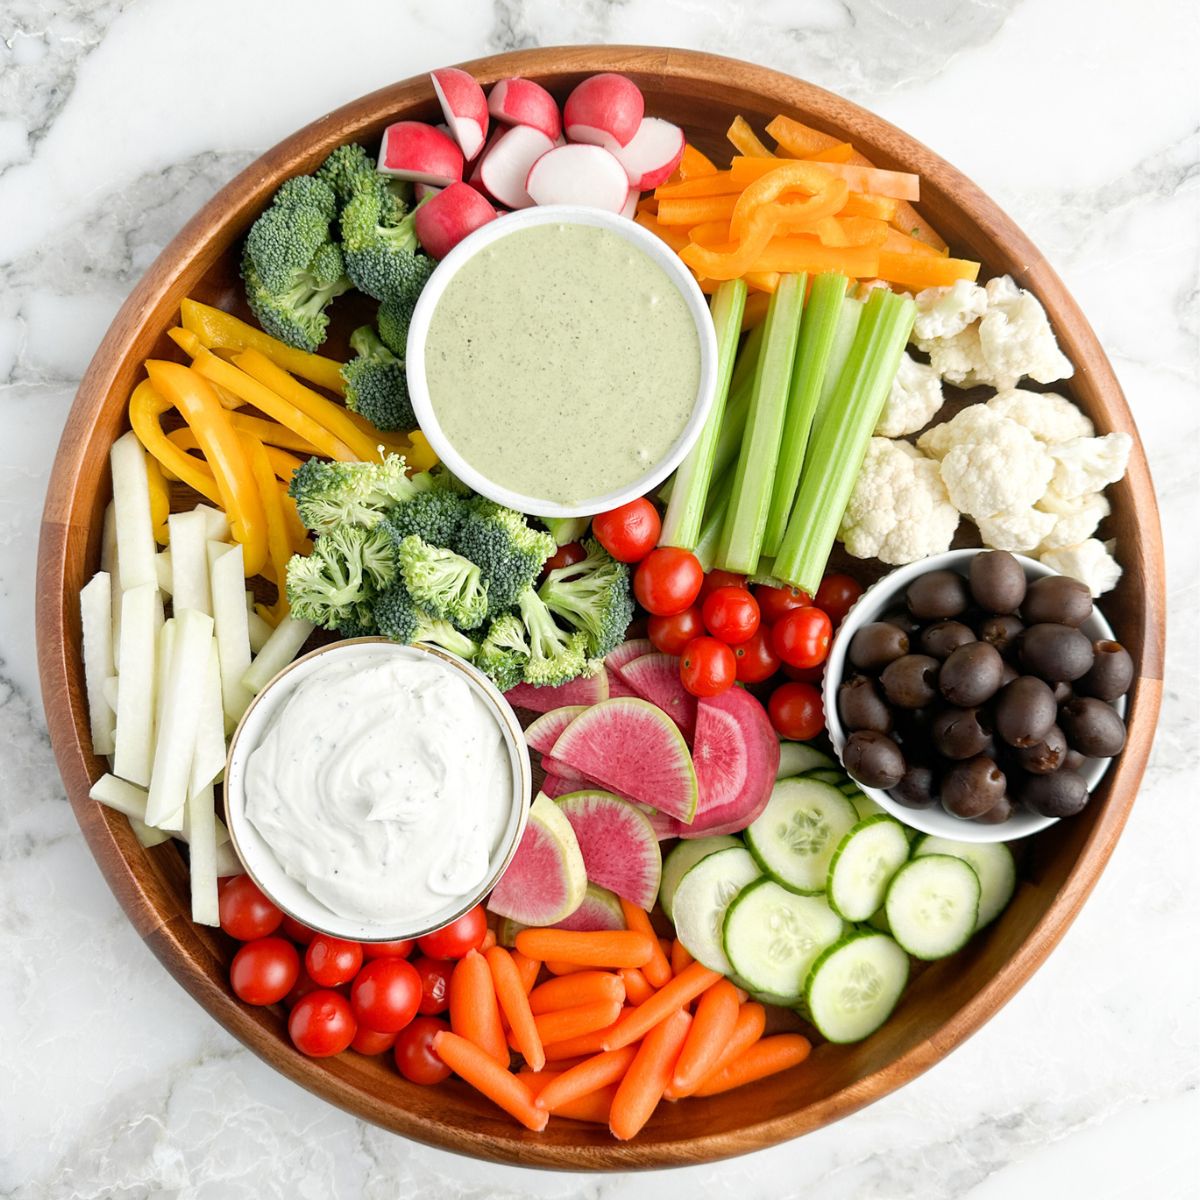 Round platter with cut up vegetables and 2 bowls of ranch dip.